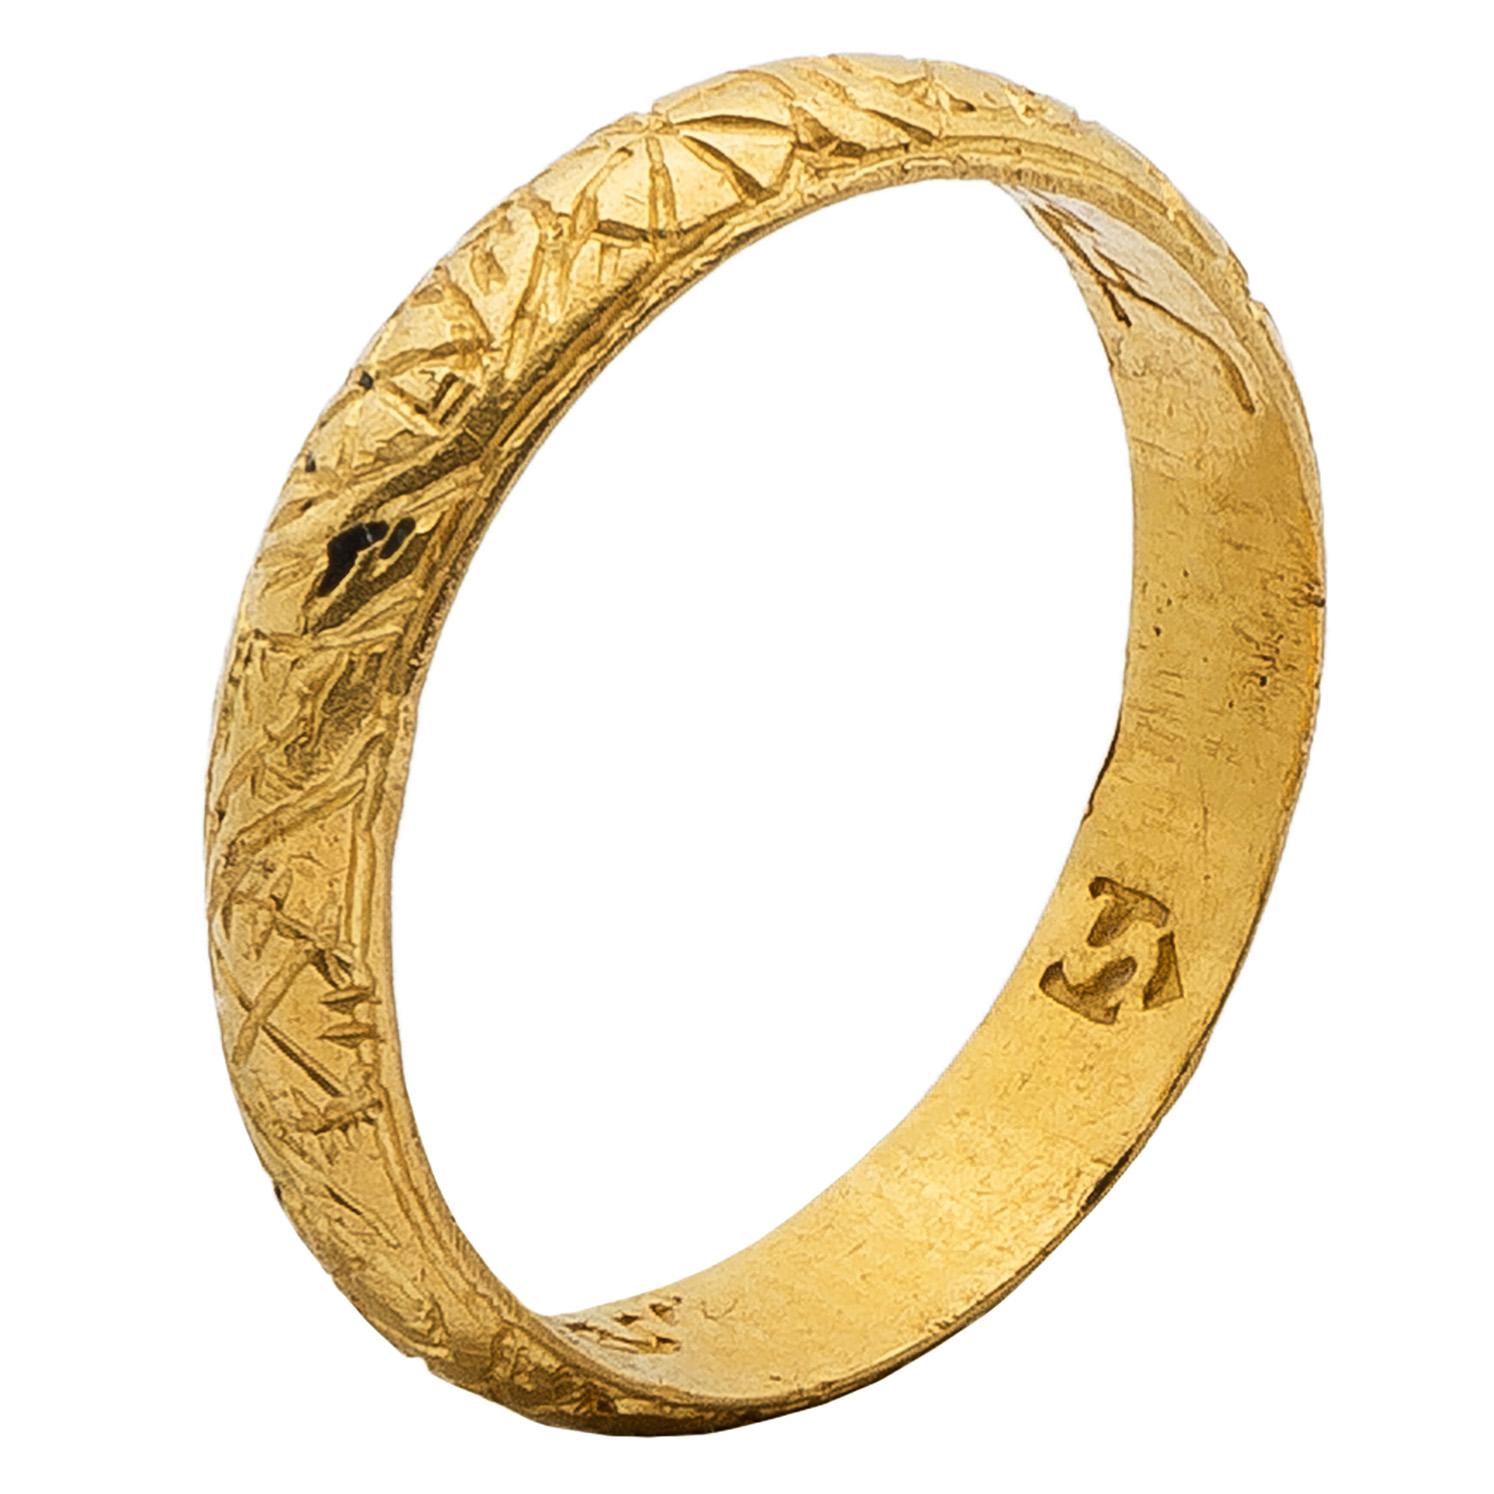 antique gold rings for sale